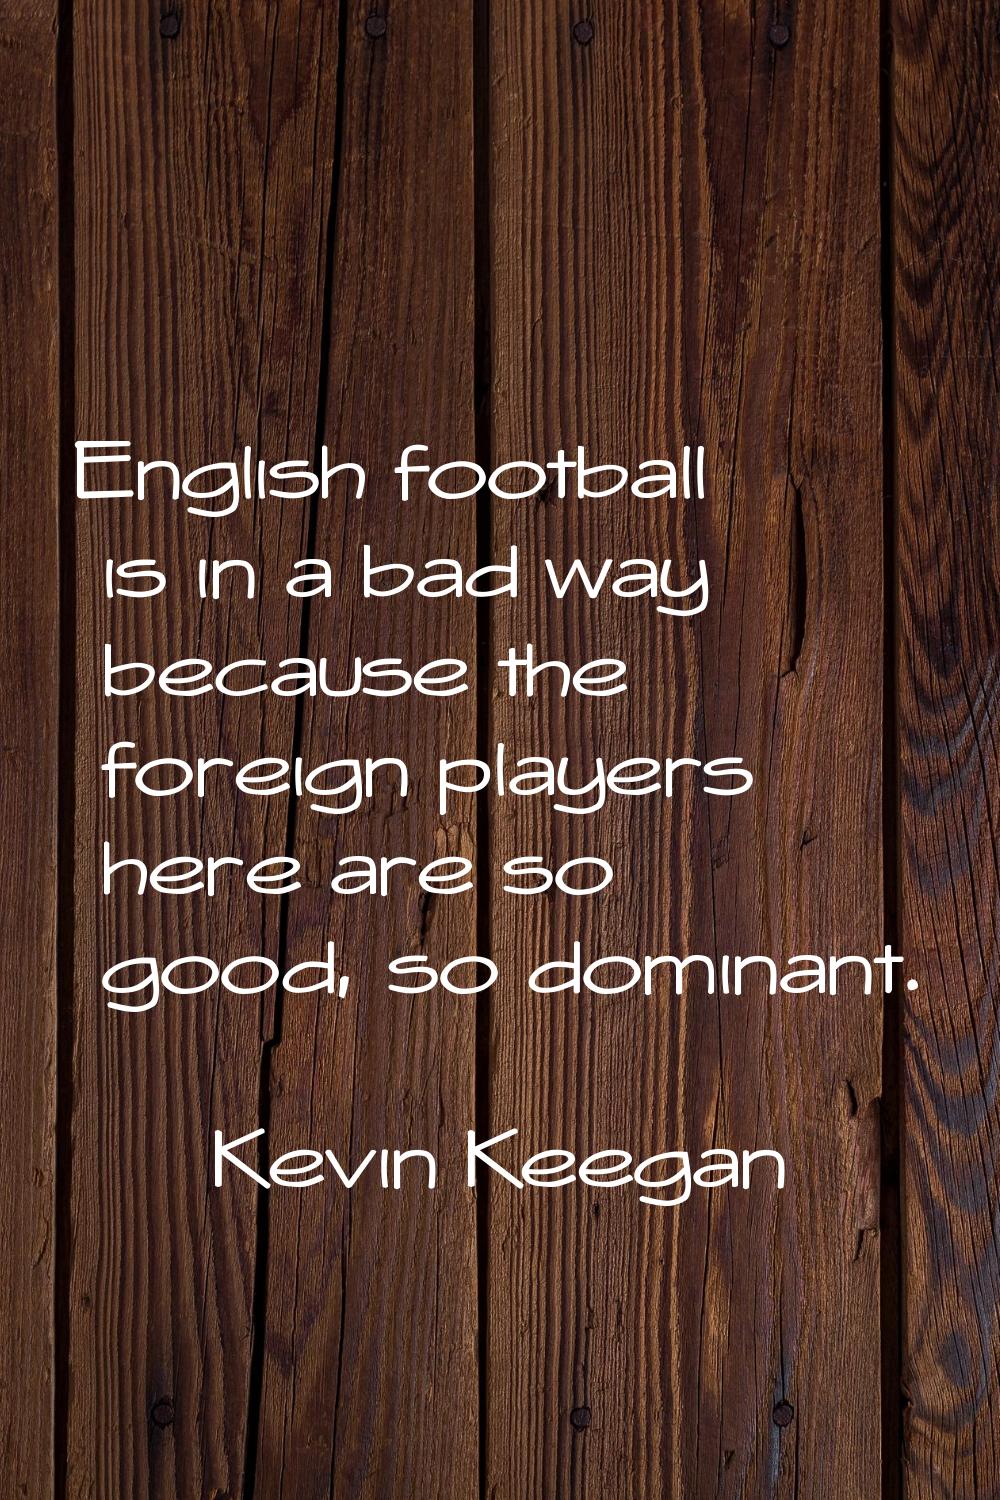 English football is in a bad way because the foreign players here are so good, so dominant.